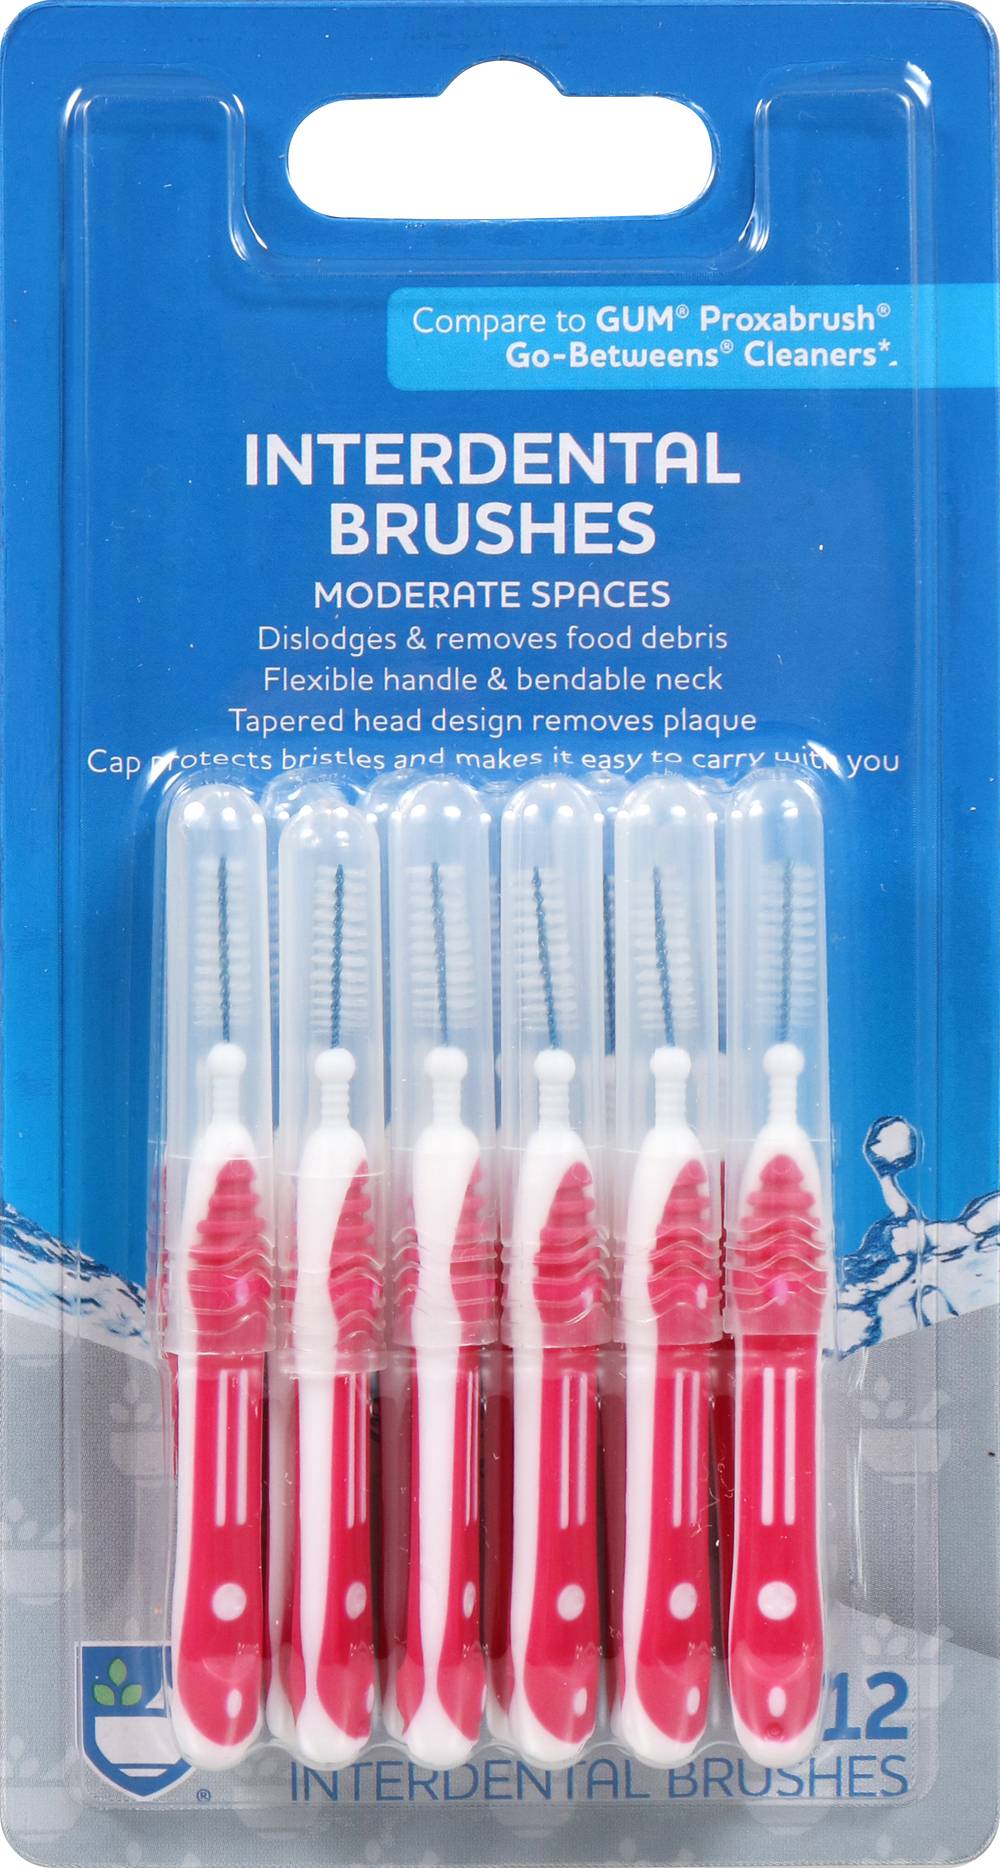 Rite Aid Interdental Moderate Space Brushes (12 ct)